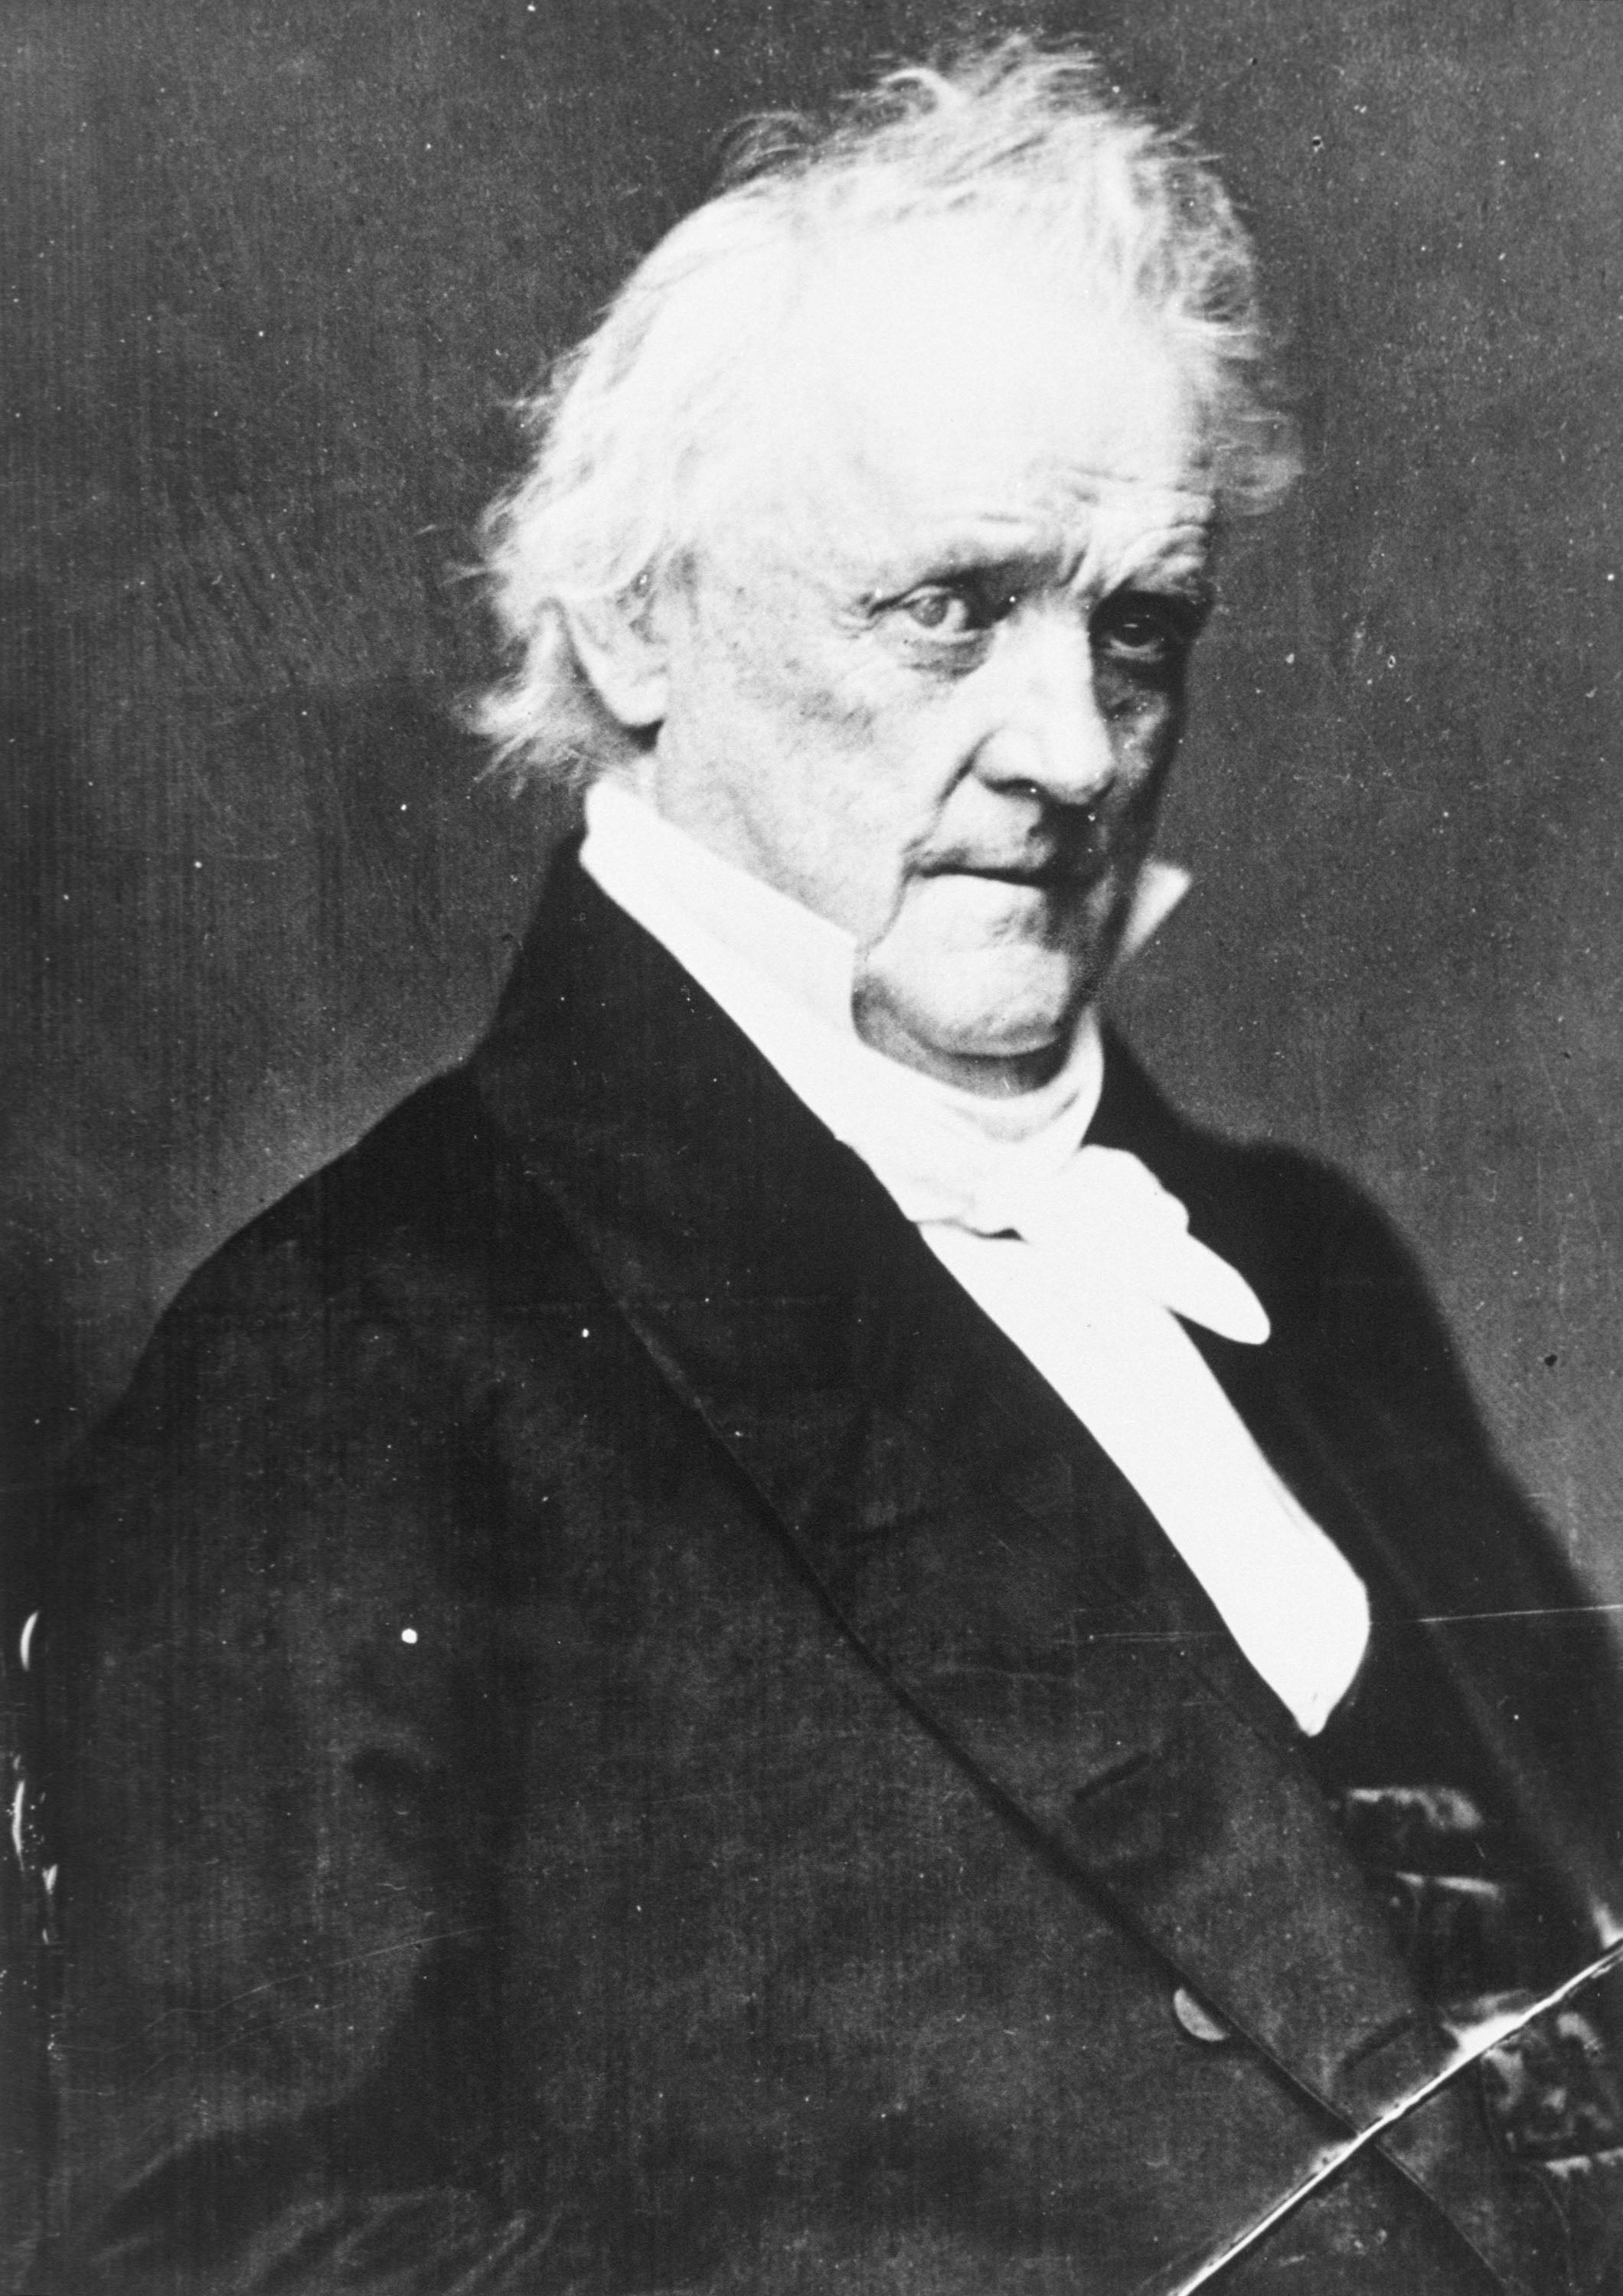 The 15th US president James Buchanan didn’t run for re-election in 1860